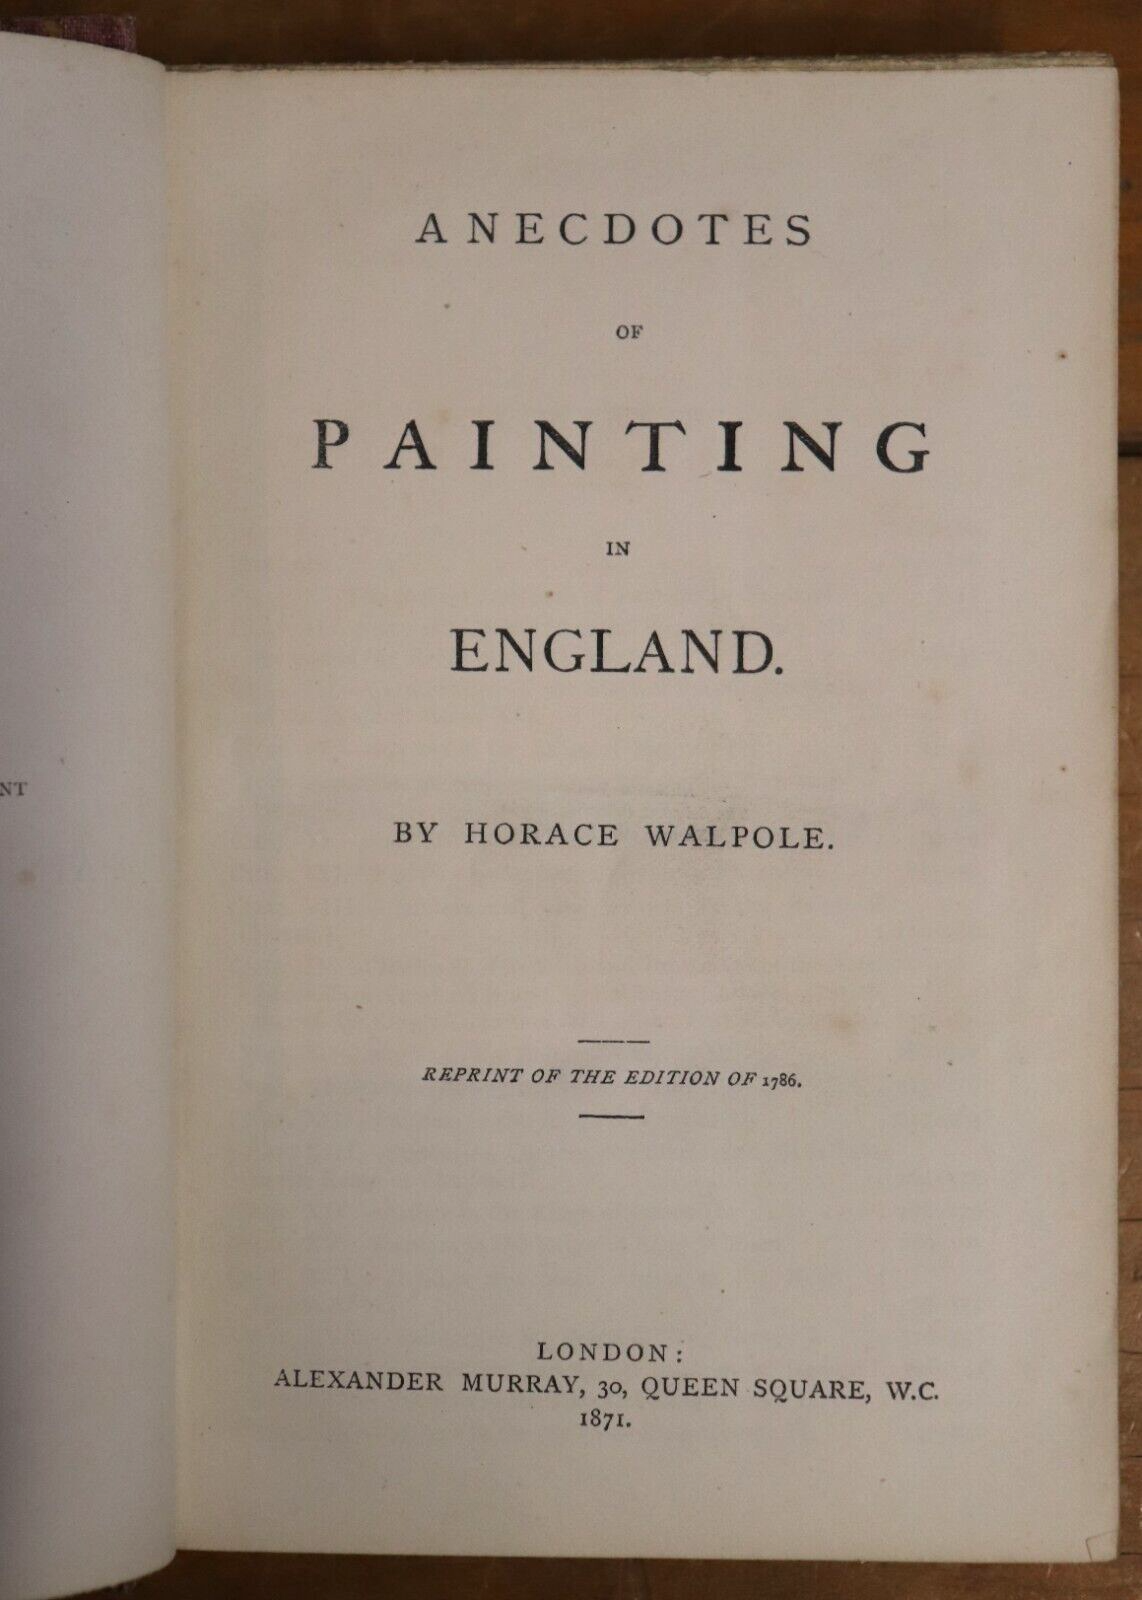 Anecdotes Of Painting In England by H Walpole - 1871 - Rare Antique Book - 0